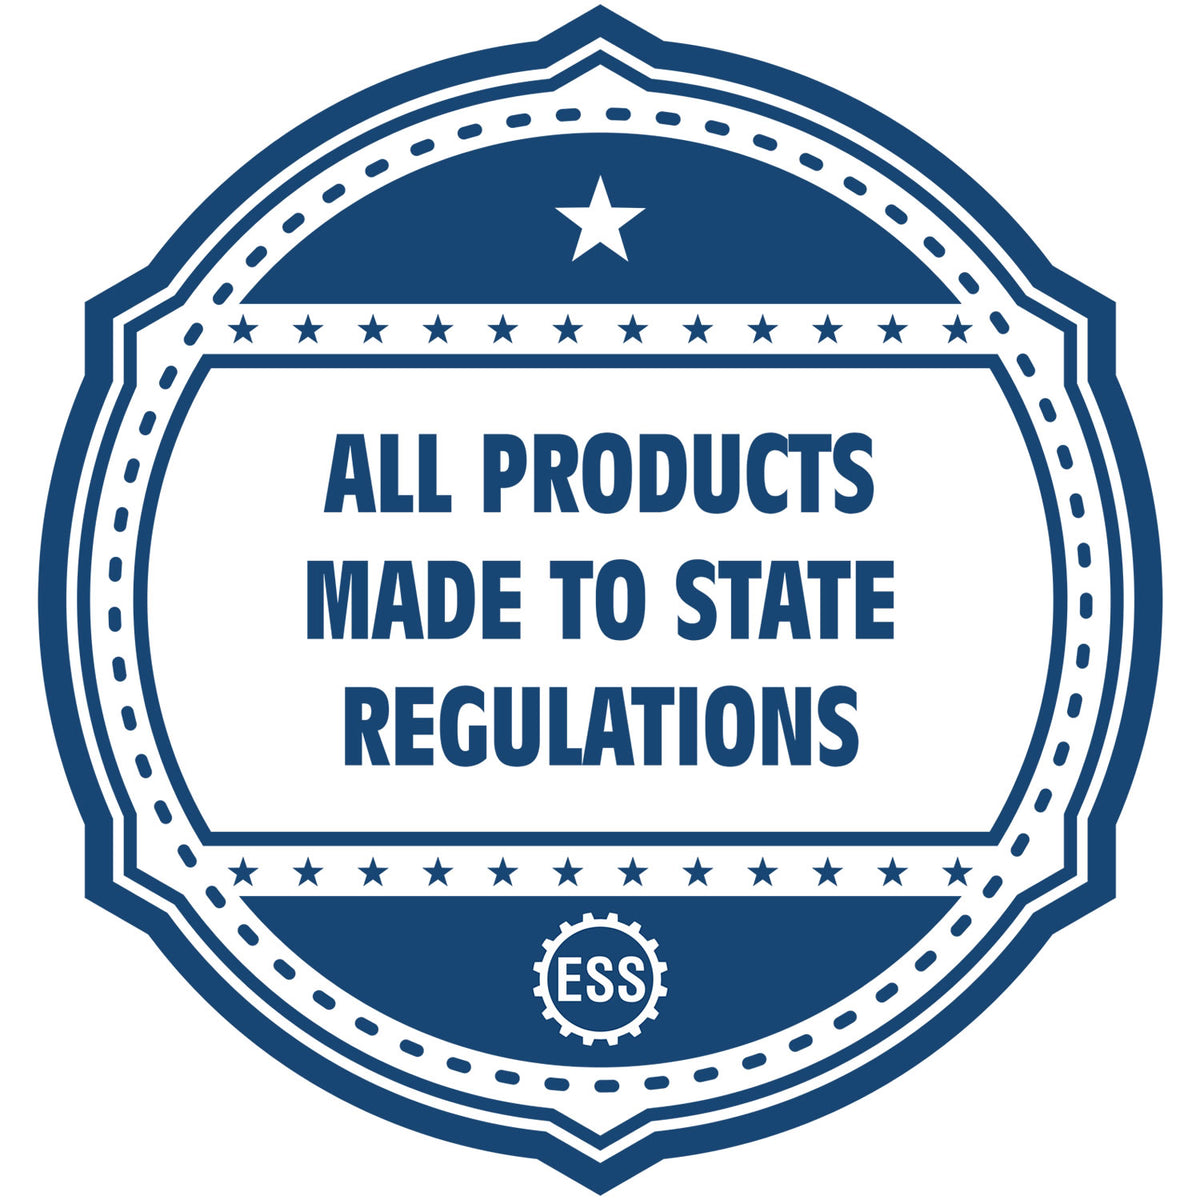 An icon or badge element for the Extended Long Reach Washington Architect Seal Embosser showing that this product is made in compliance with state regulations.